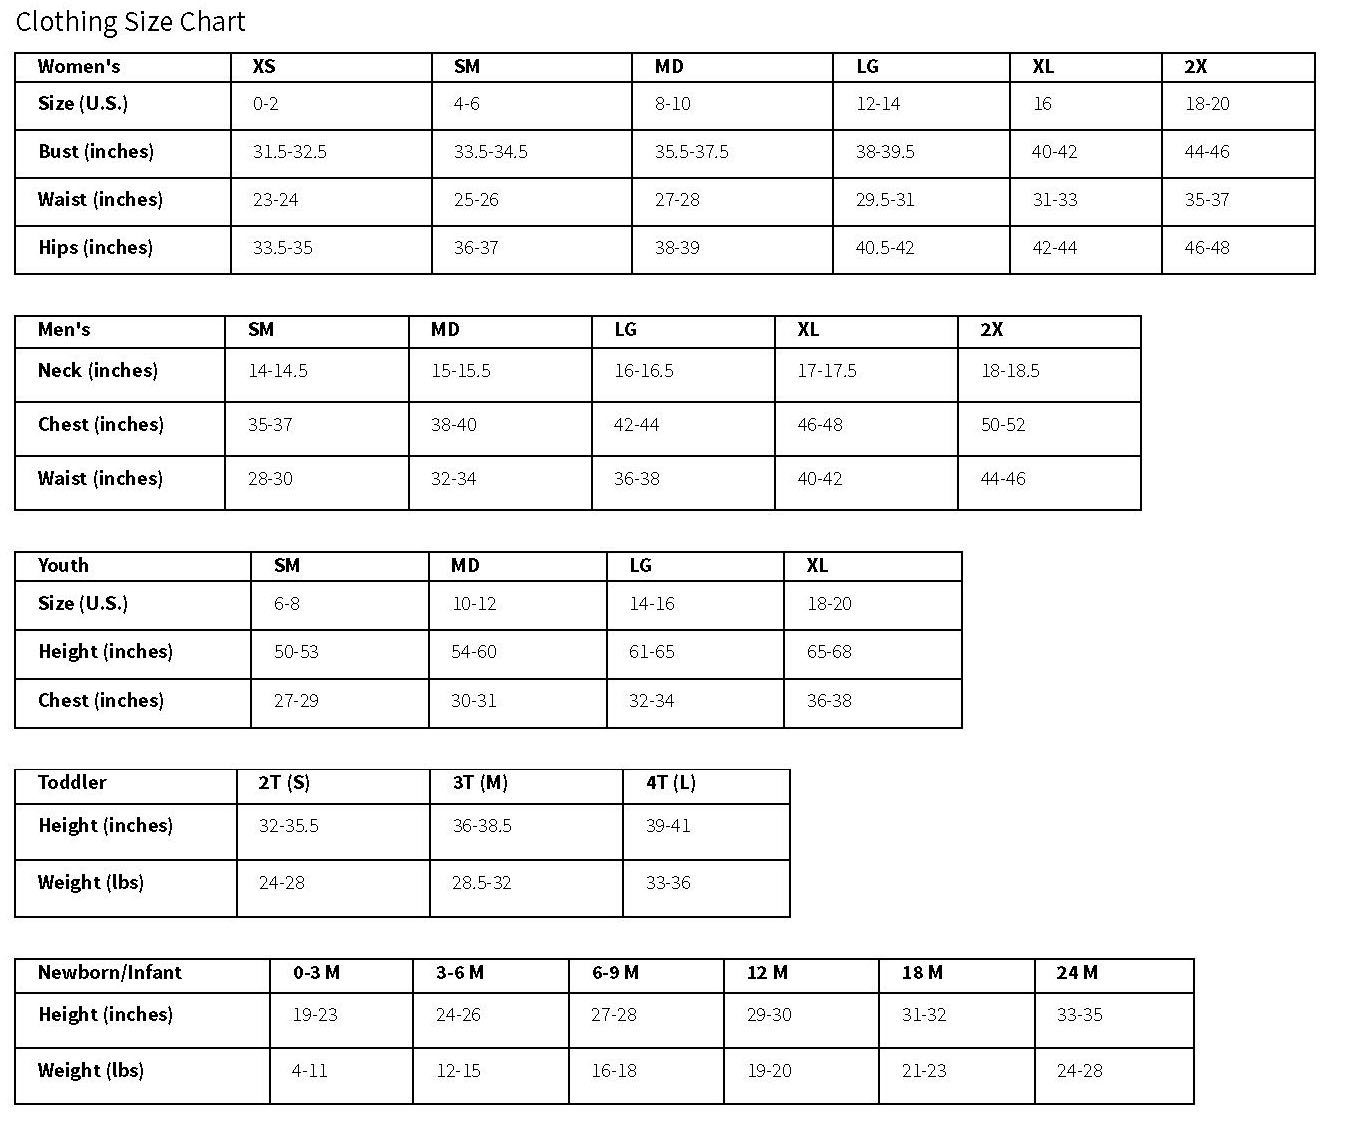 Clothing Size Chart | Jefferson Campus Store